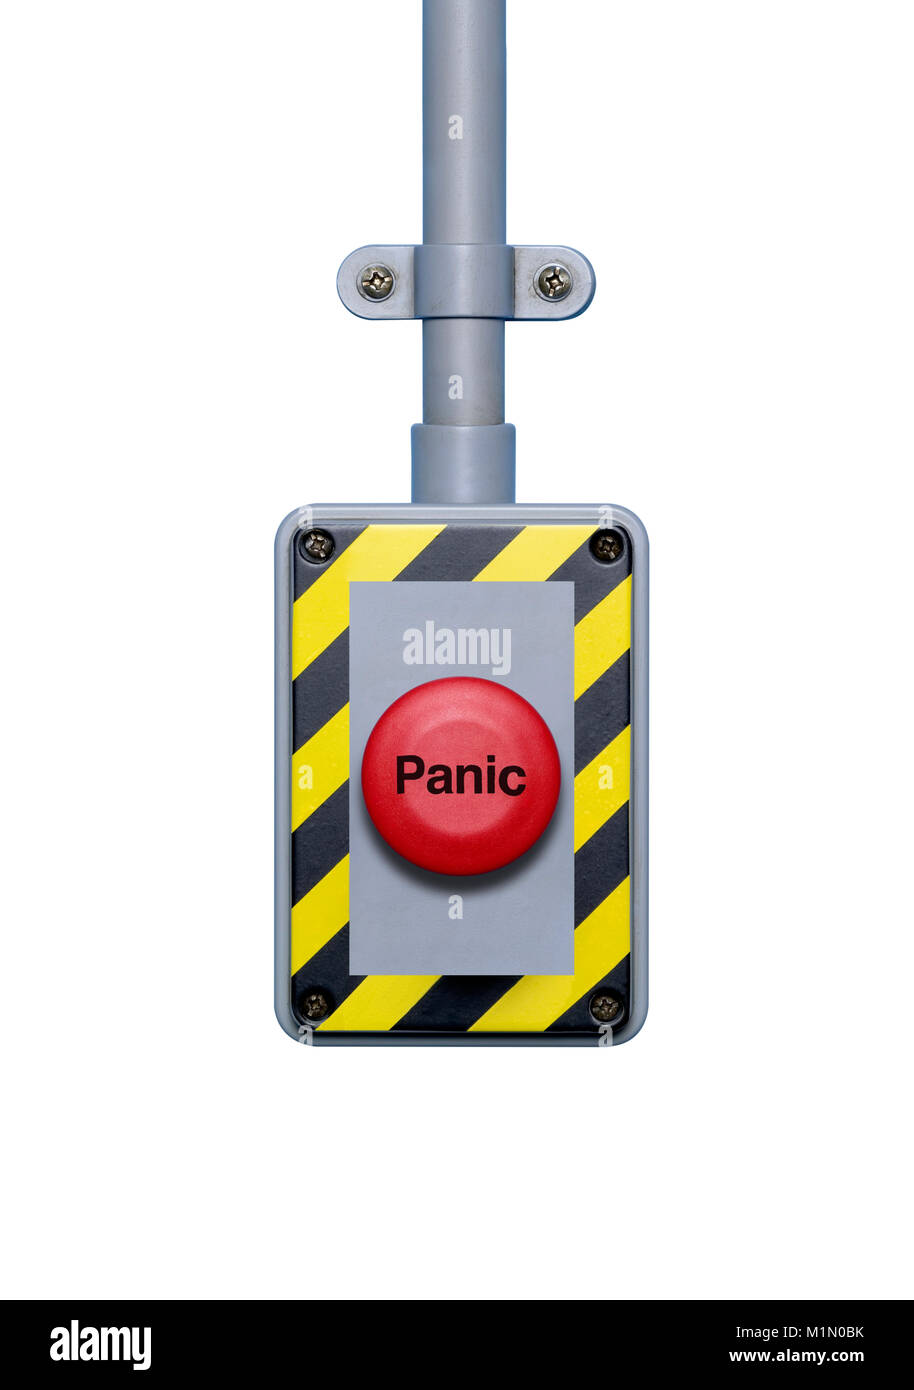 A cut out shot of an industrial looking red panic button Stock Photo